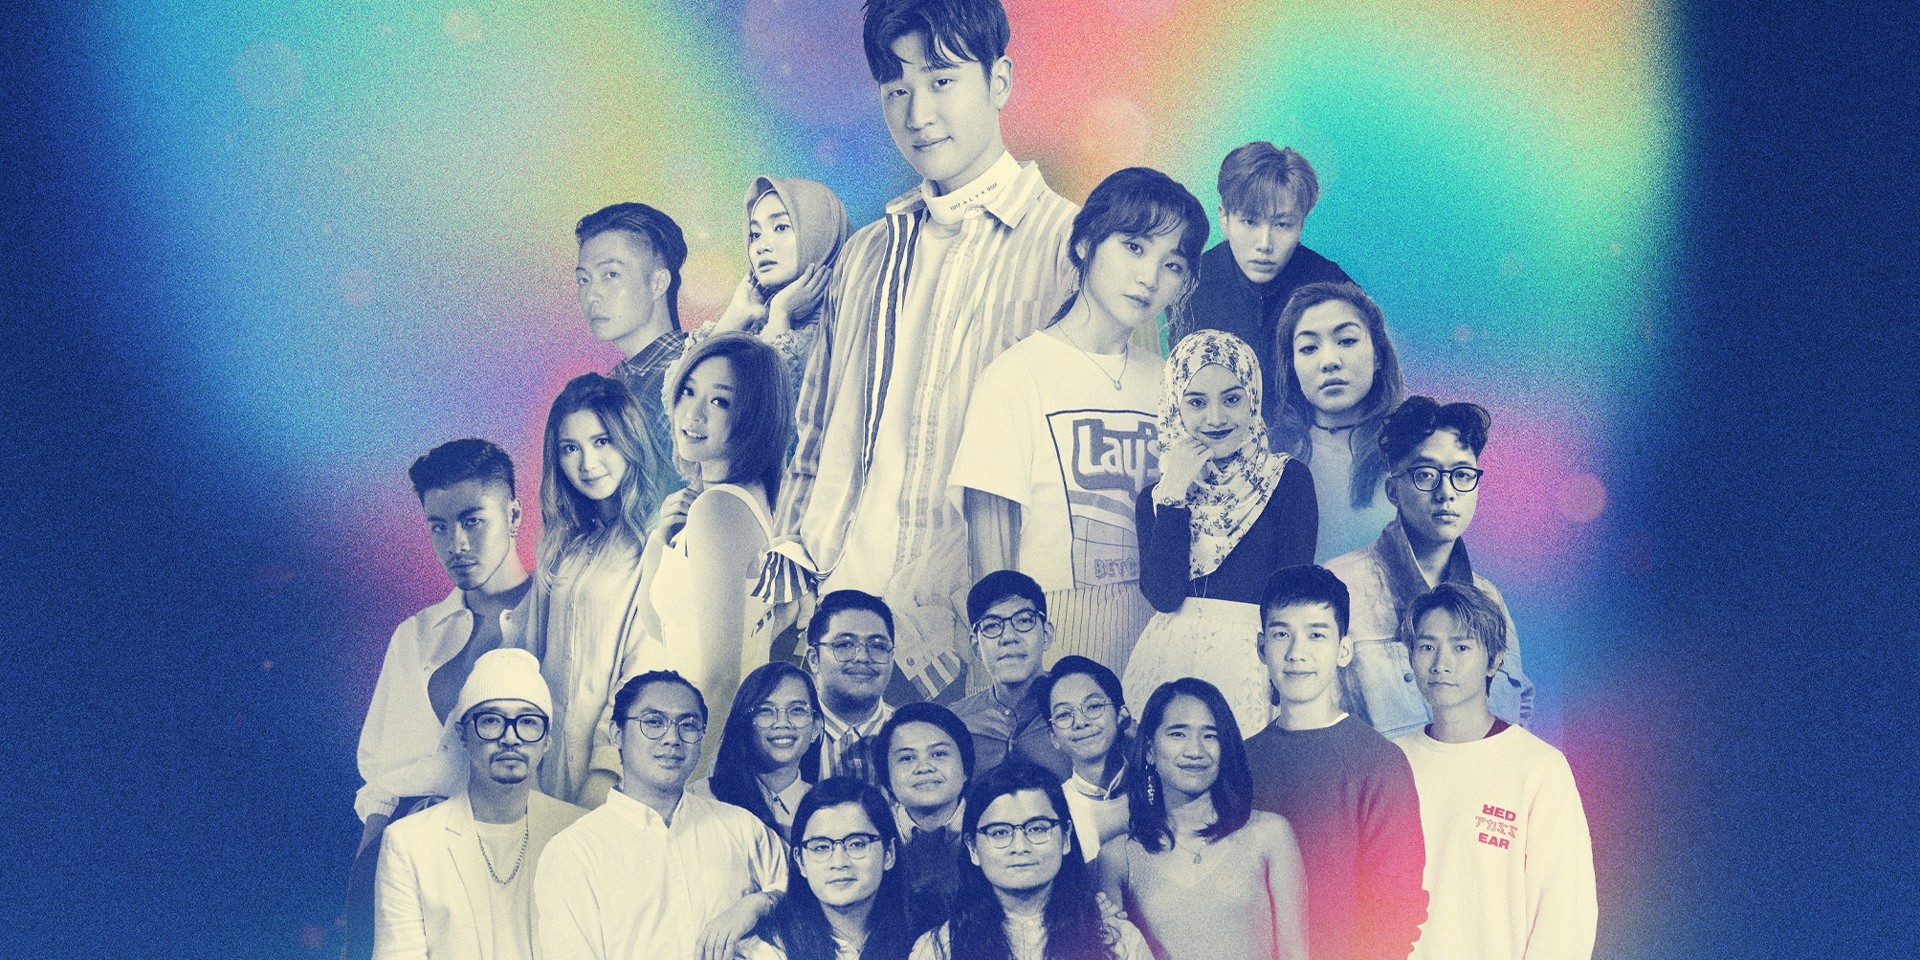 Eric Chou, Ben&Ben, Benjamin Kheng, and more release 'Forever Beautiful: All for One Version' for the benefit of coronavirus relief efforts – listen